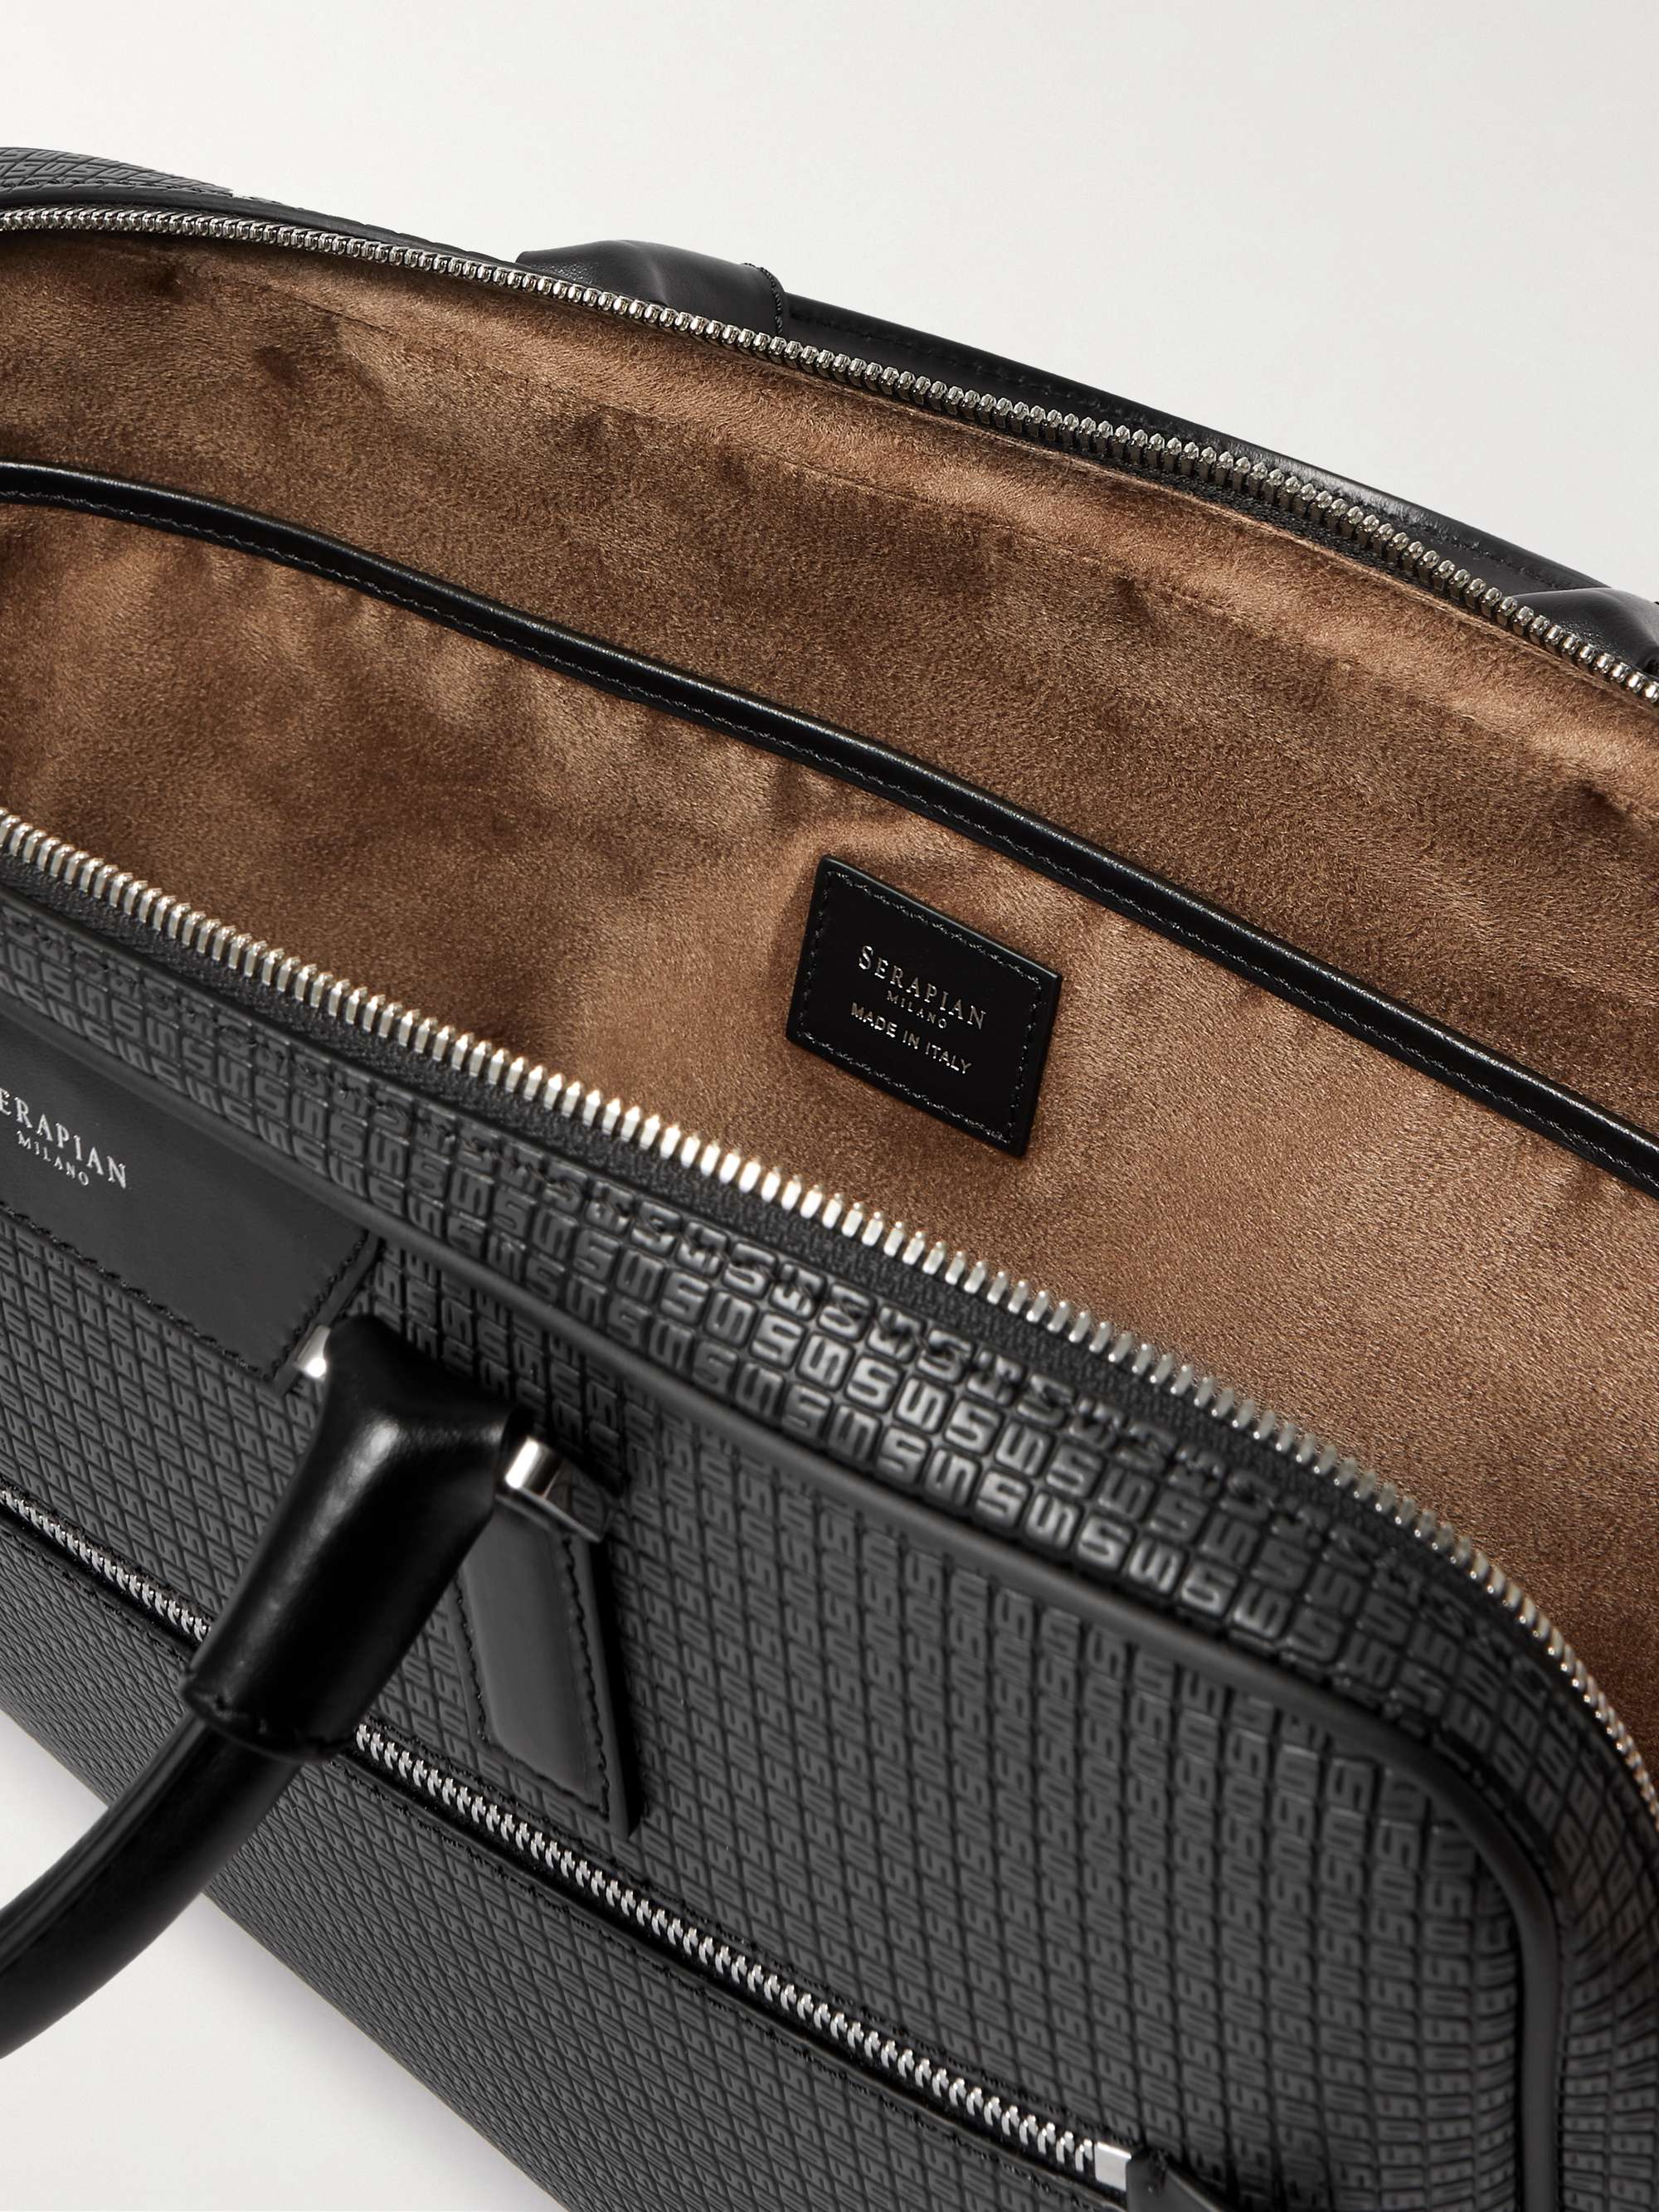 SERAPIAN Stepan Logo-Debossed Leather-Trimmed Coated-Canvas Briefcase